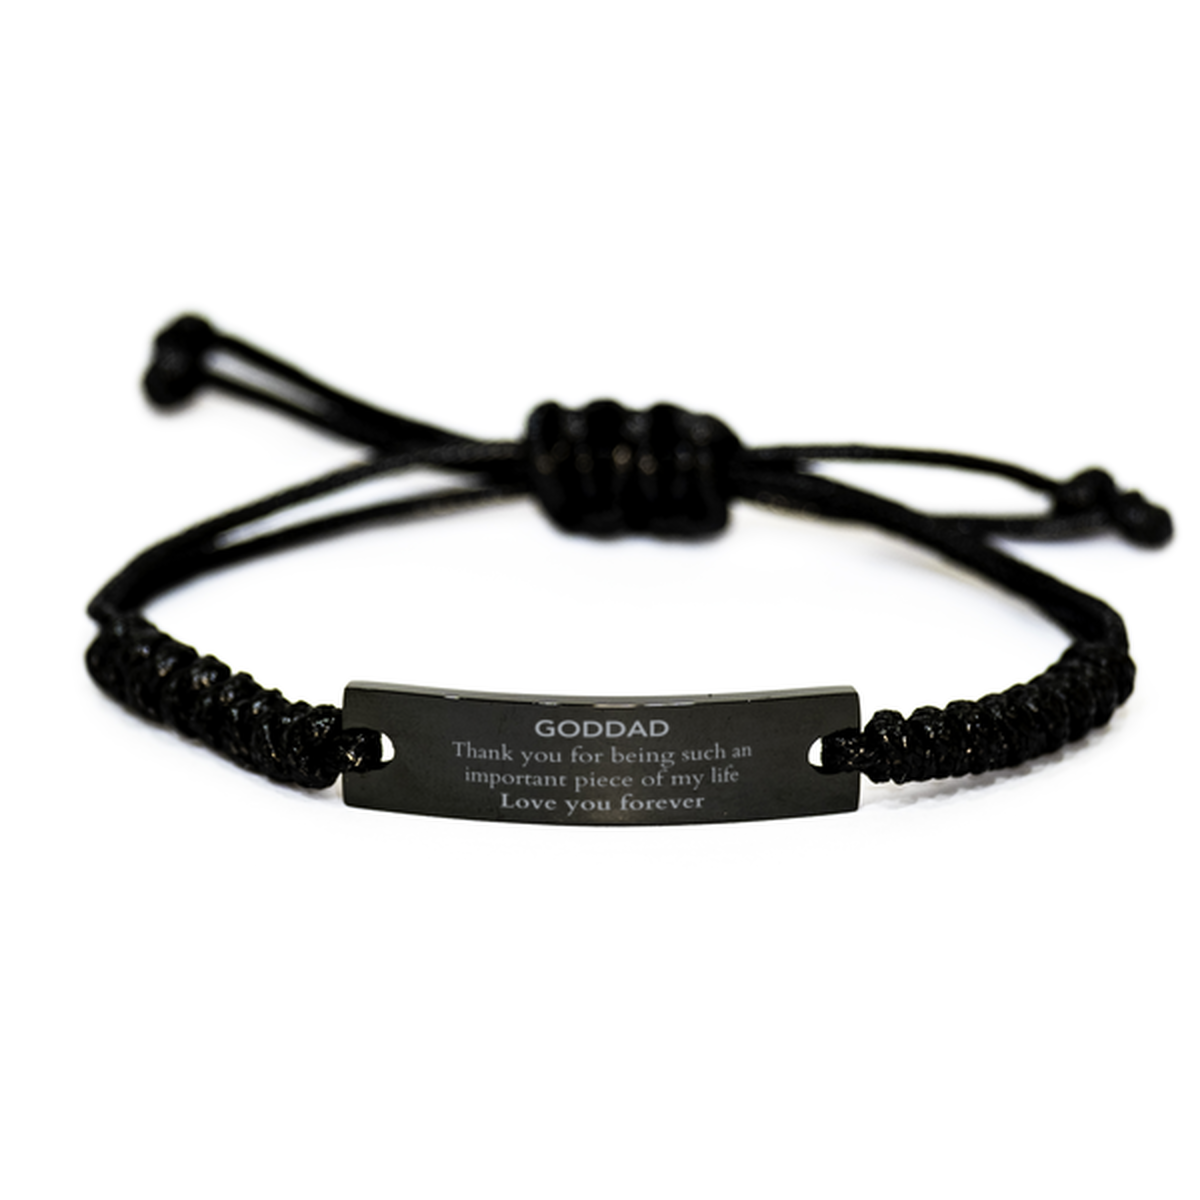 Appropriate Goddad Black Rope Bracelet Epic Birthday Gifts for Goddad Thank you for being such an important piece of my life Goddad Christmas Mothers Fathers Day